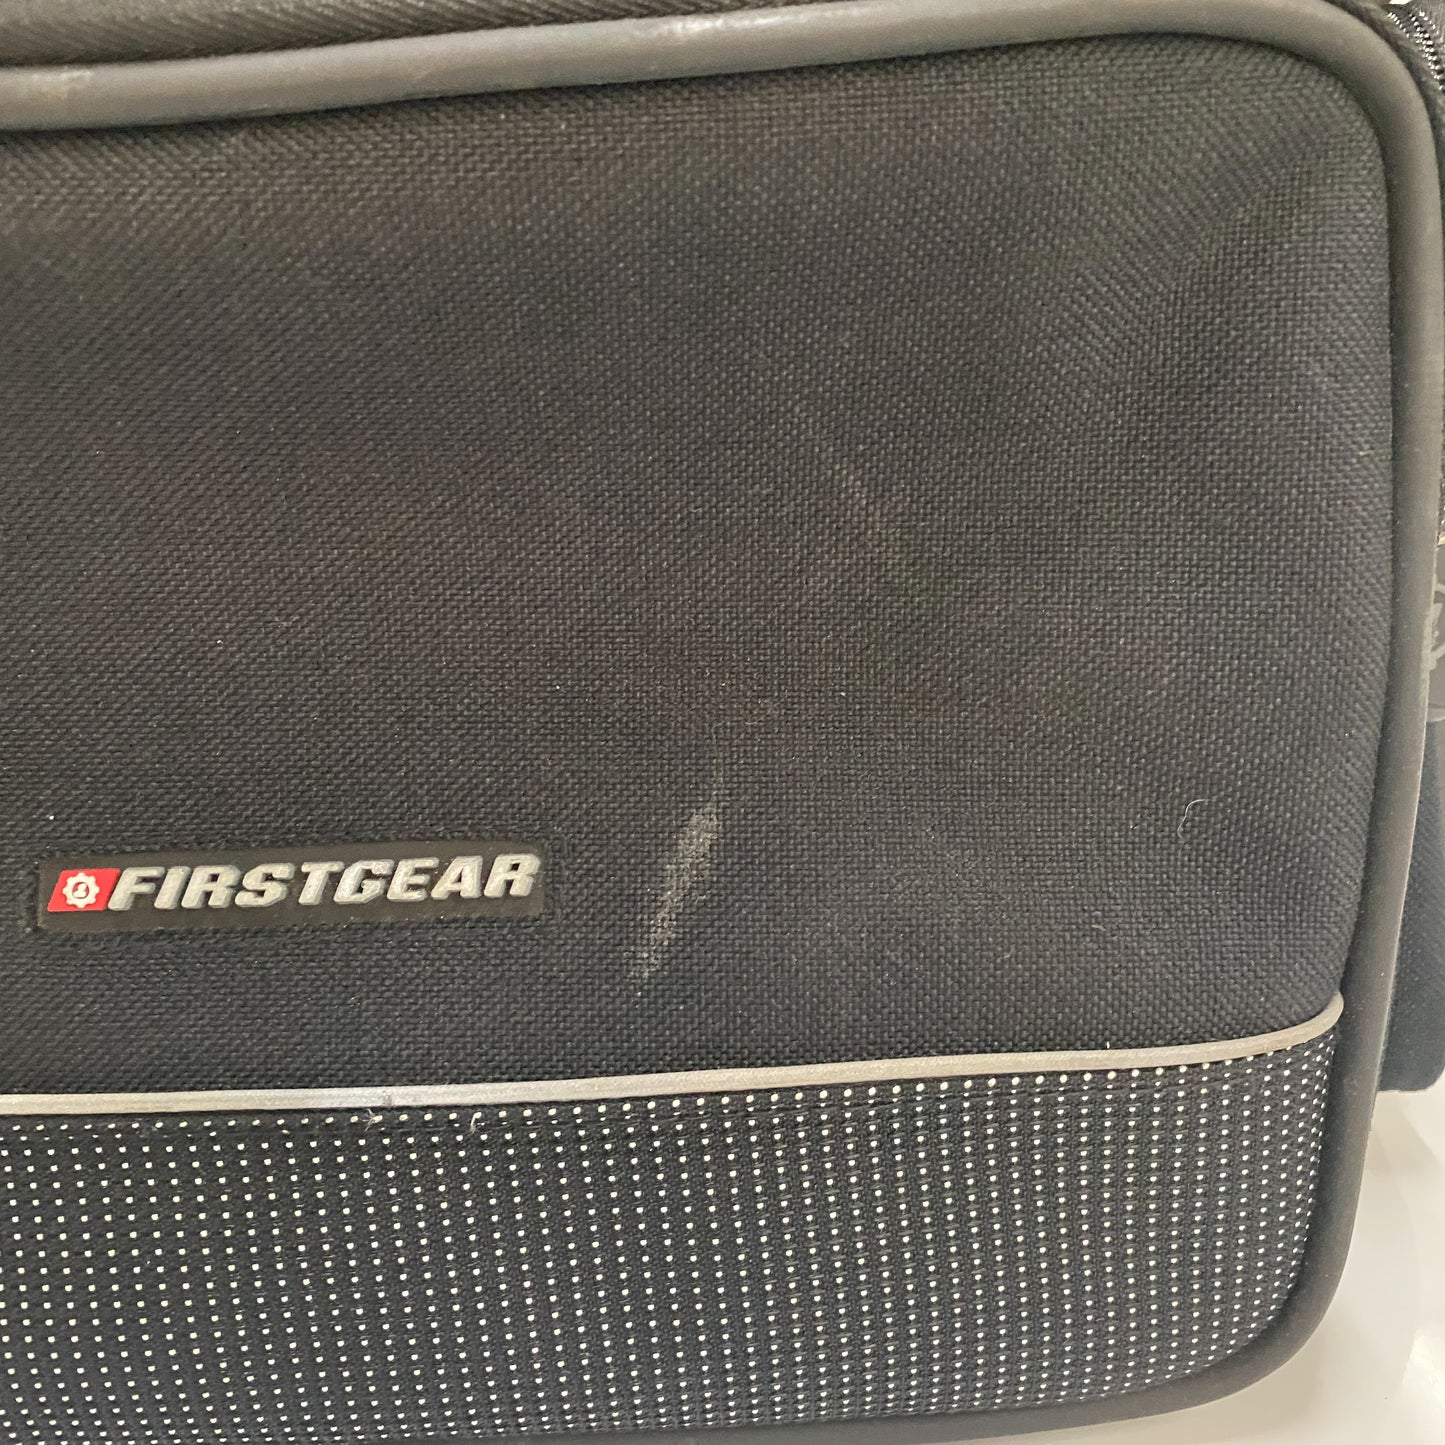 First Gear Onyx Tail Bag 107238 USED